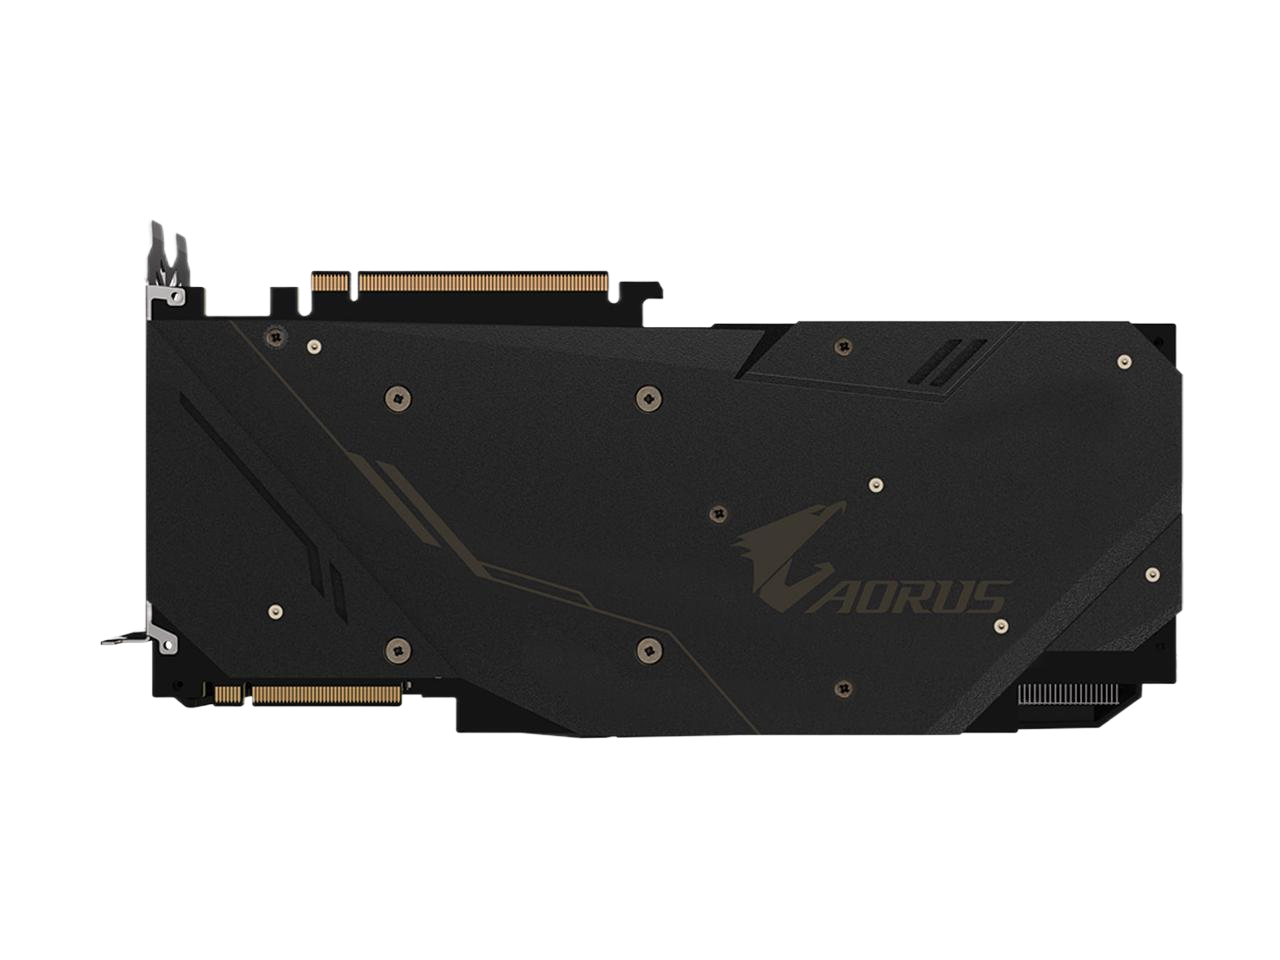 GIGABYTE GeForce RTX 2080 AORUS 8GB 256-Bit GDDR6 with 3xStacked WINDFORCE Fans Video Card GV-N2080AORUS-8GC